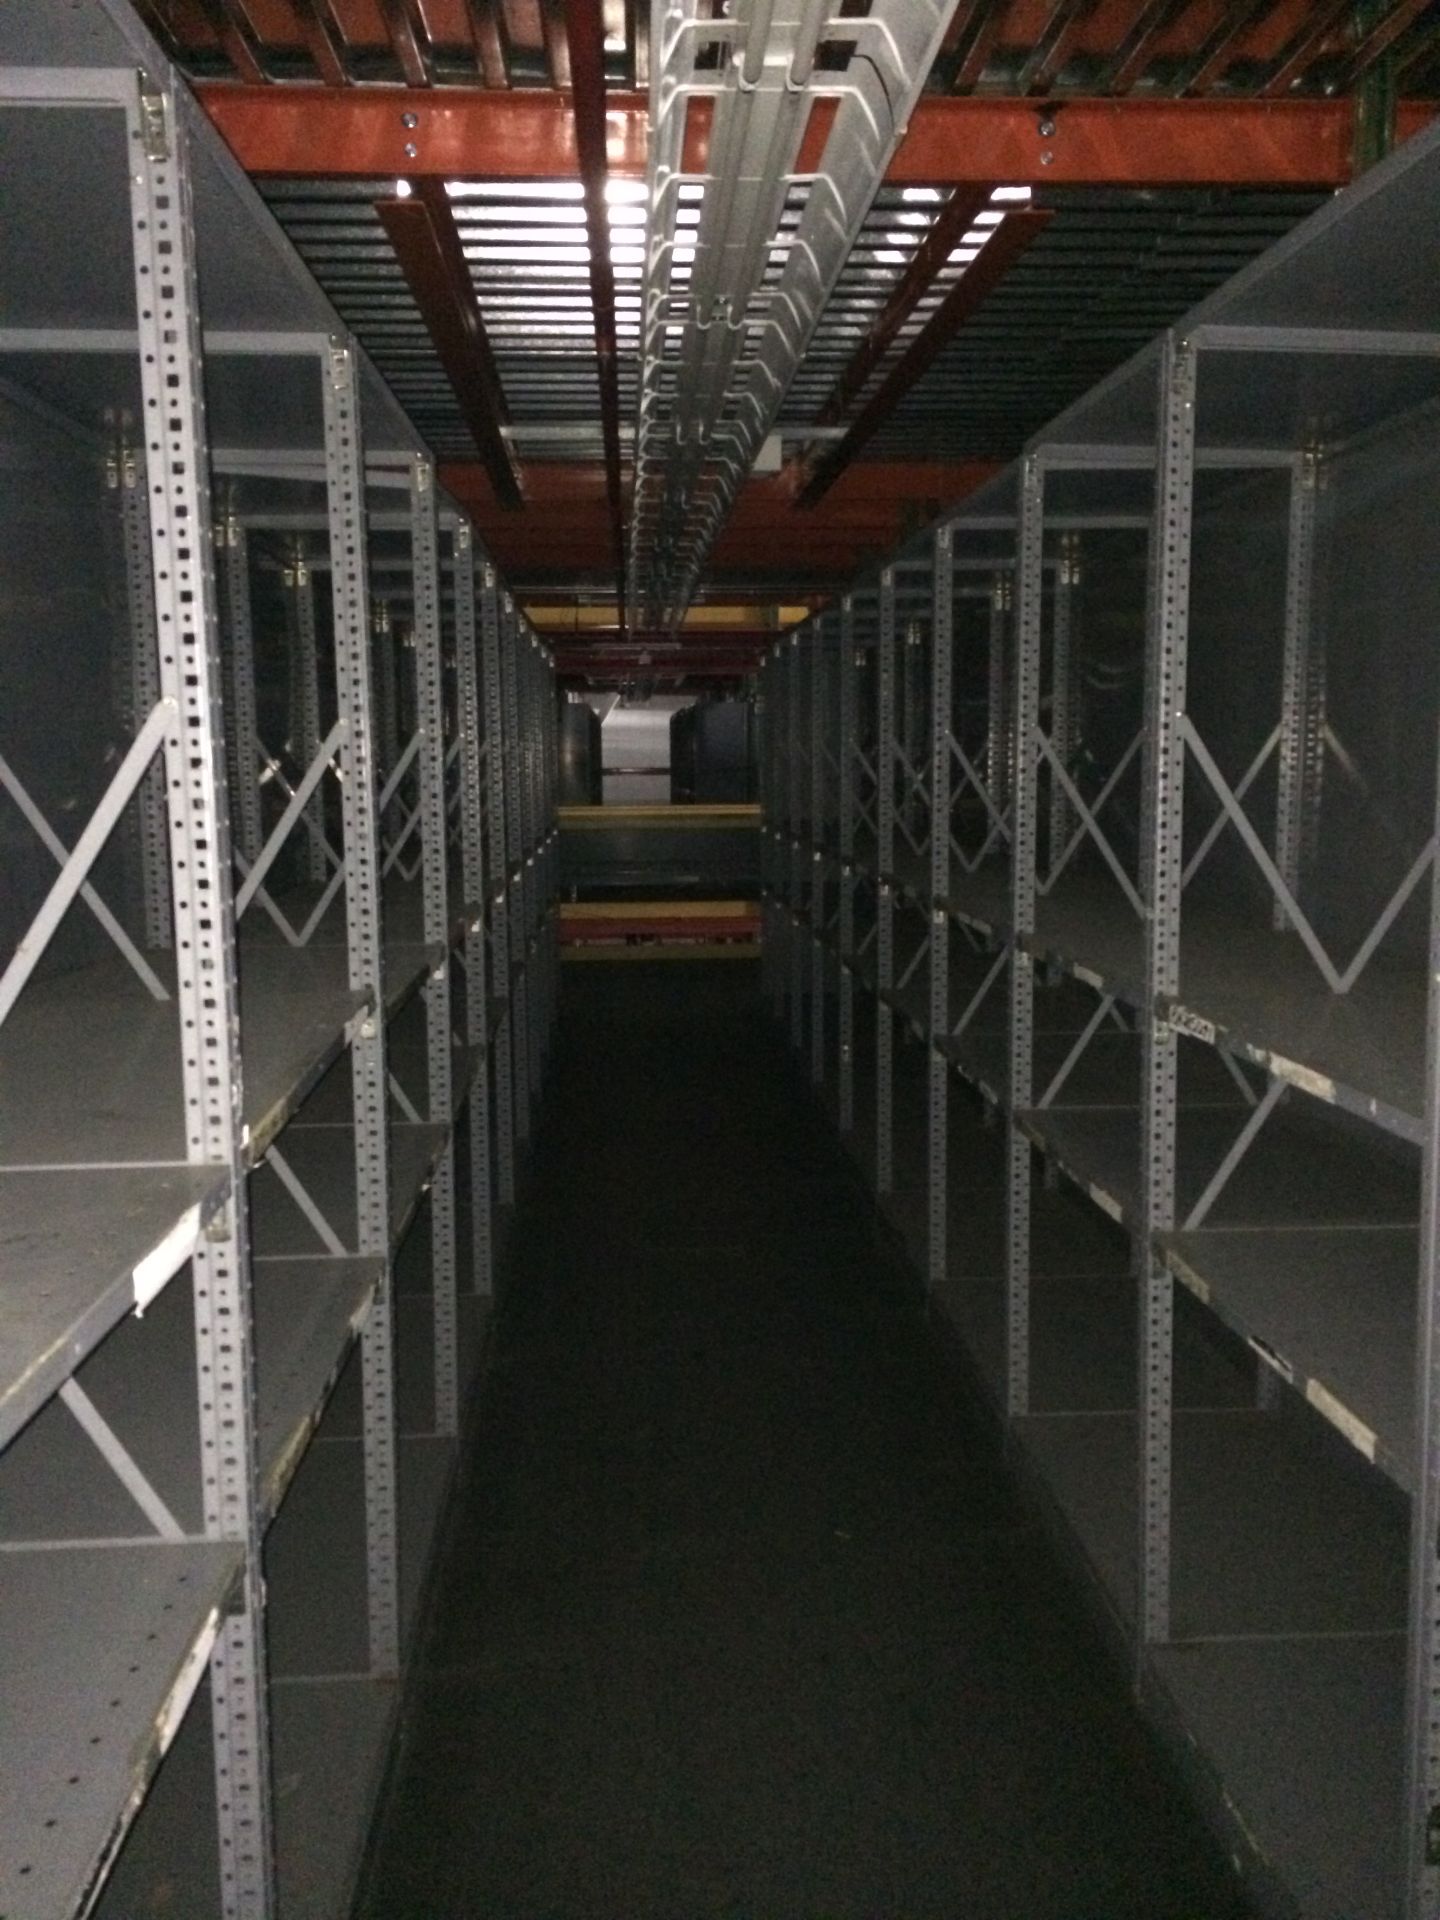 60 SECTIONS OF CLOSED BACK INDUSTRIAL CLIP SHELVING, SHELF SIZE 24"D X 36"W  EACH SIZE: 24"D X 36"